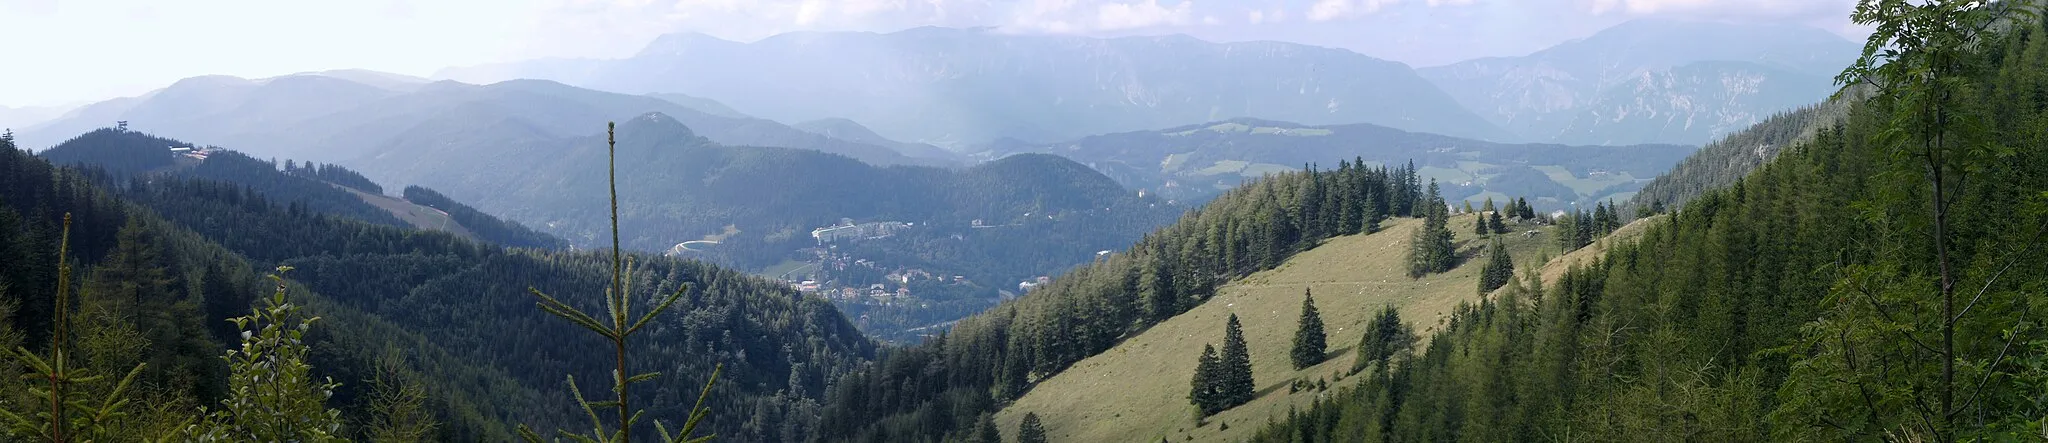 Photo showing: Panoramic view of Rax (in the middle of upper part of image) and Schneeberg (right side) mountains from the slopes of Dürrriegel, with Hirschenkogel and its observation tower near the left edge and Semmering (Lower Austria) down in the valley (image centre).